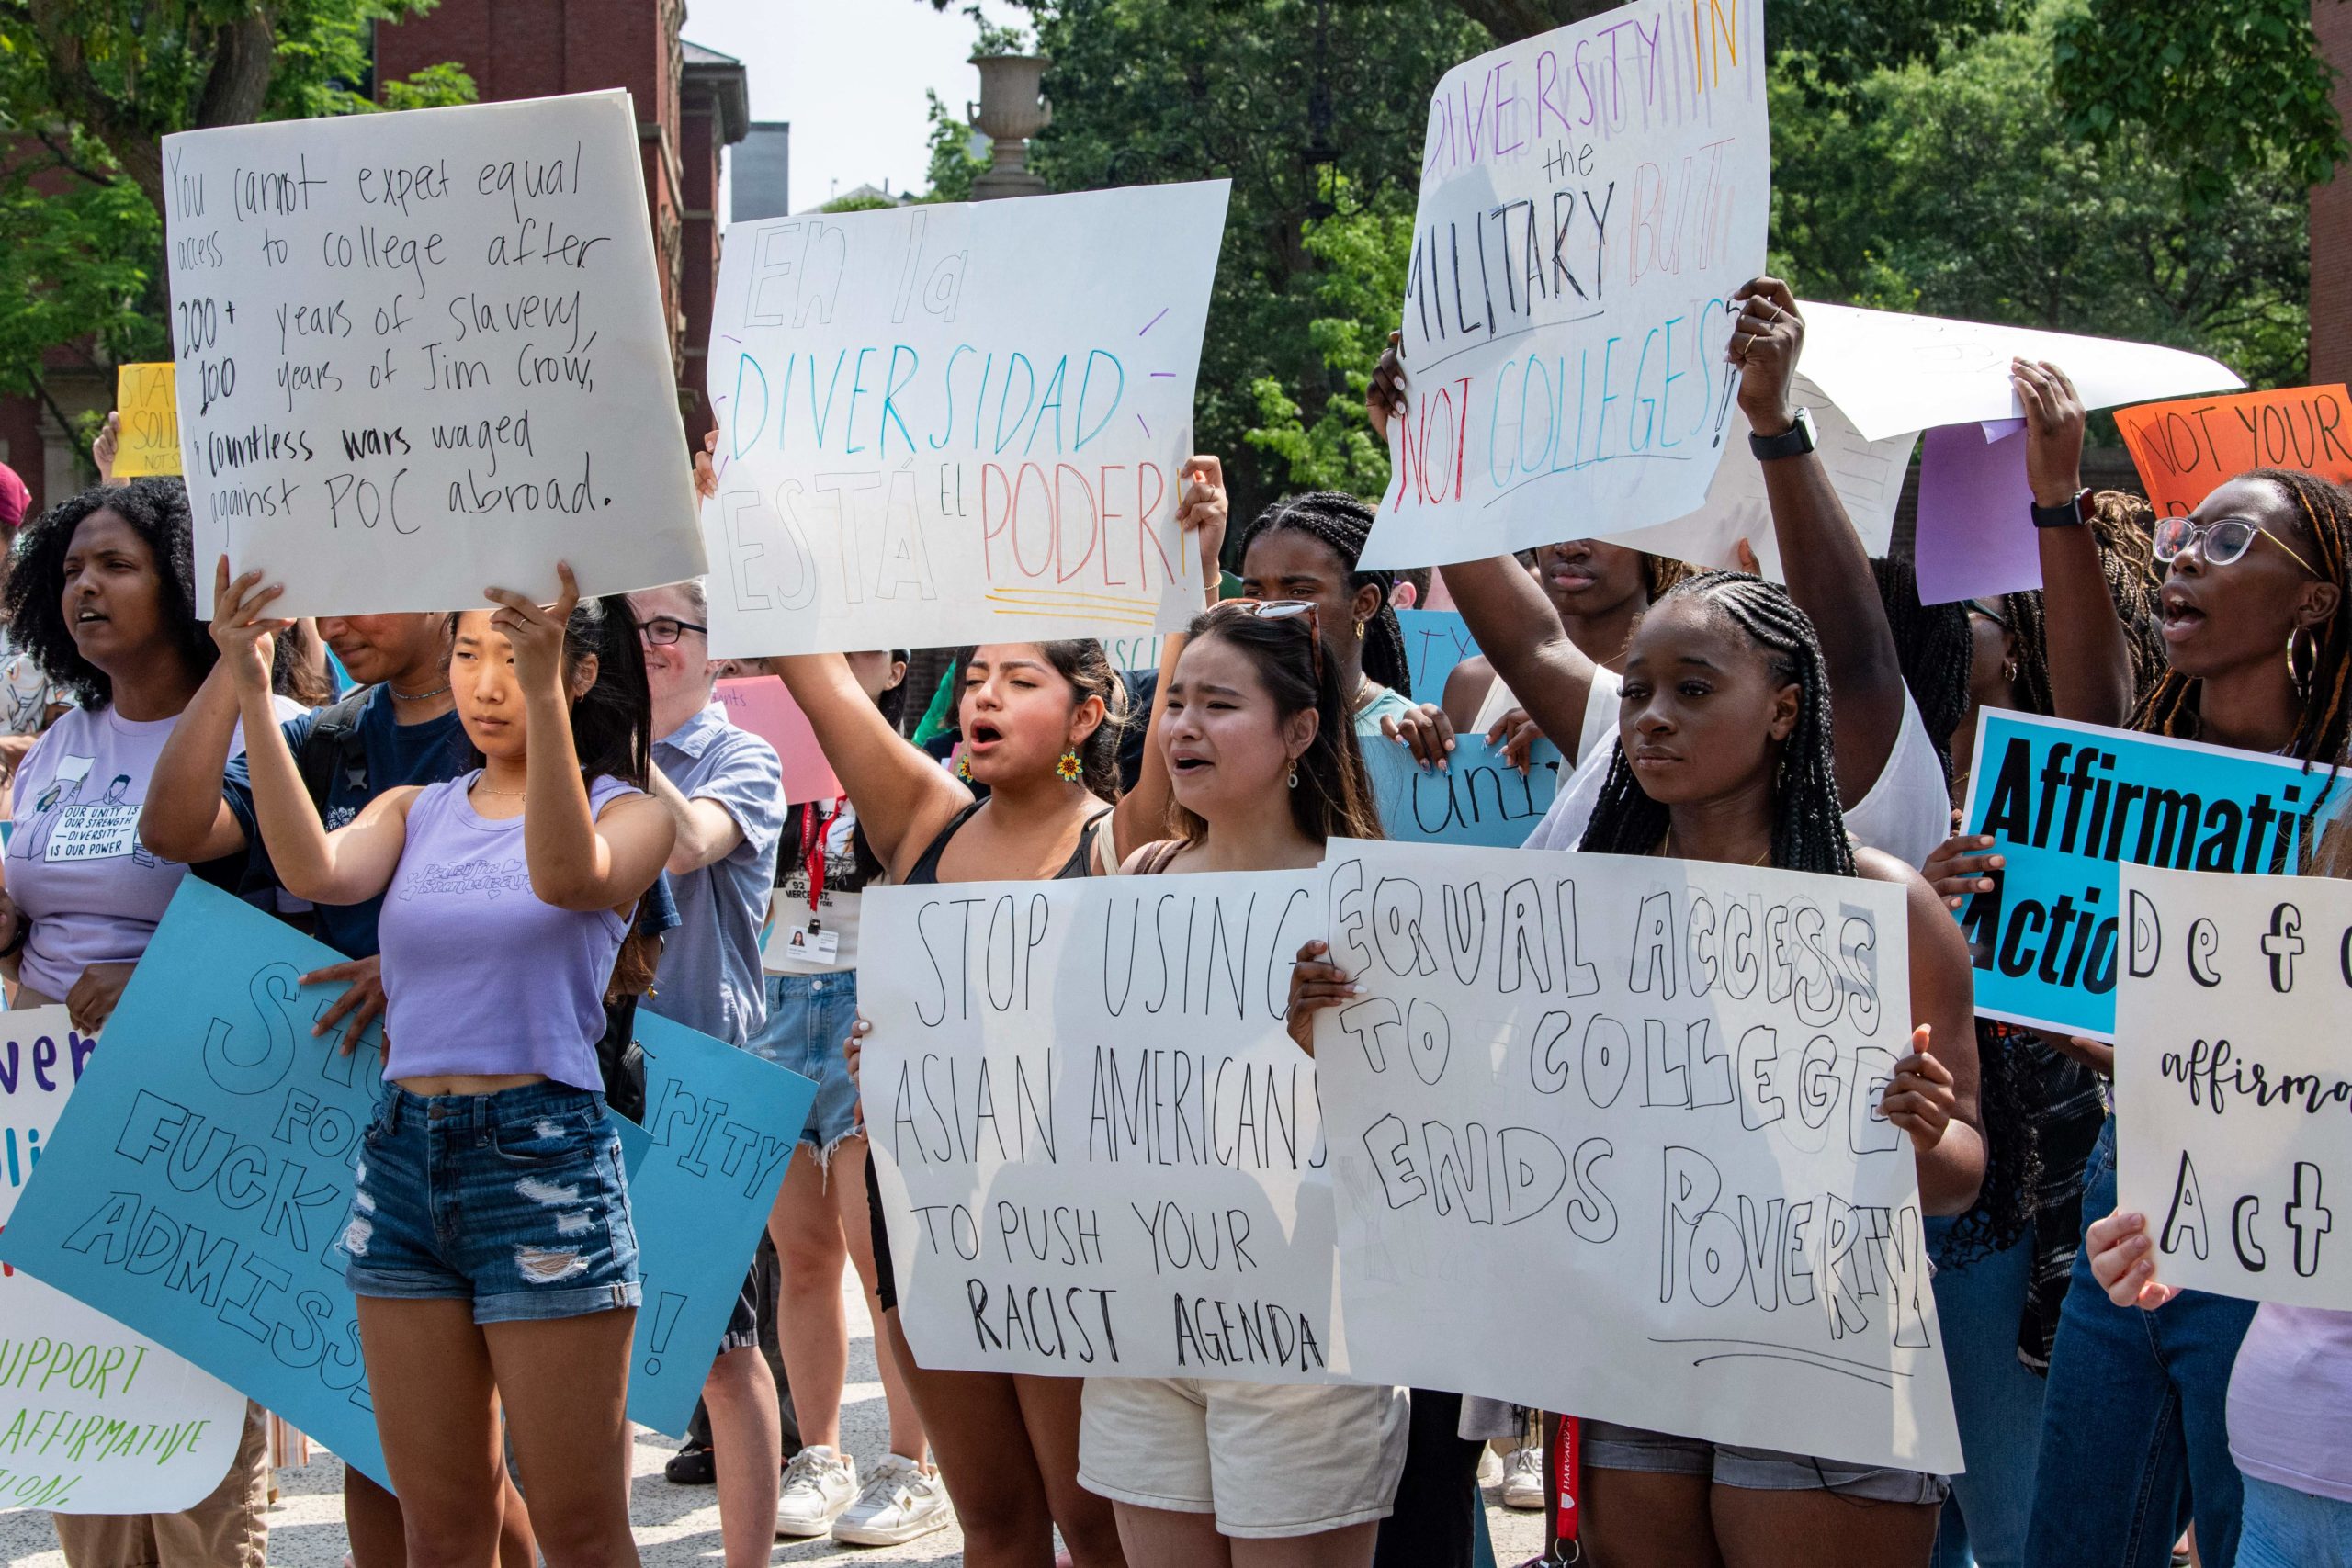 Proponents of affirmative action hold signs during a protest at Harvard University in Cambridge, Massachusetts, on July 1, 2023. The US Supreme Court on June 27 banned the use of race and ethnicity in university admissions, dealing a major blow to a decades-old practice that boosted educational opportunities for African-Americans and other minorities. (Photo by Joseph Prezioso / AFP) (Photo by JOSEPH PREZIOSO/AFP via Getty Images)